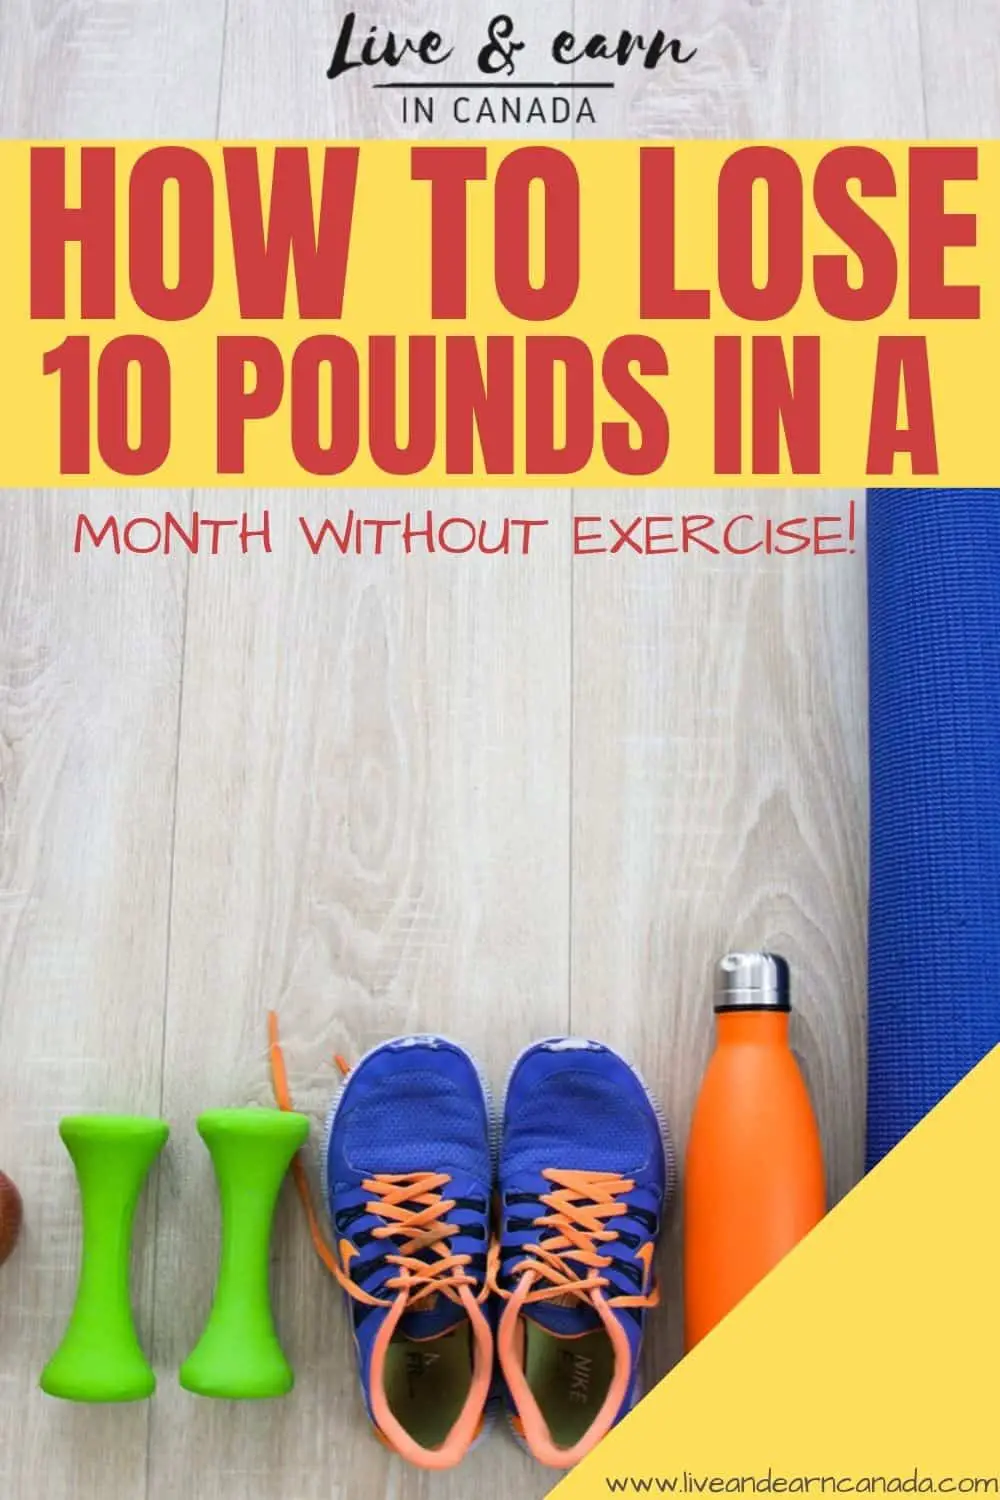 how to lose 10 pounds in a month without exercise. Here is how to lose 10 pounds in a month without exercise #10pounds